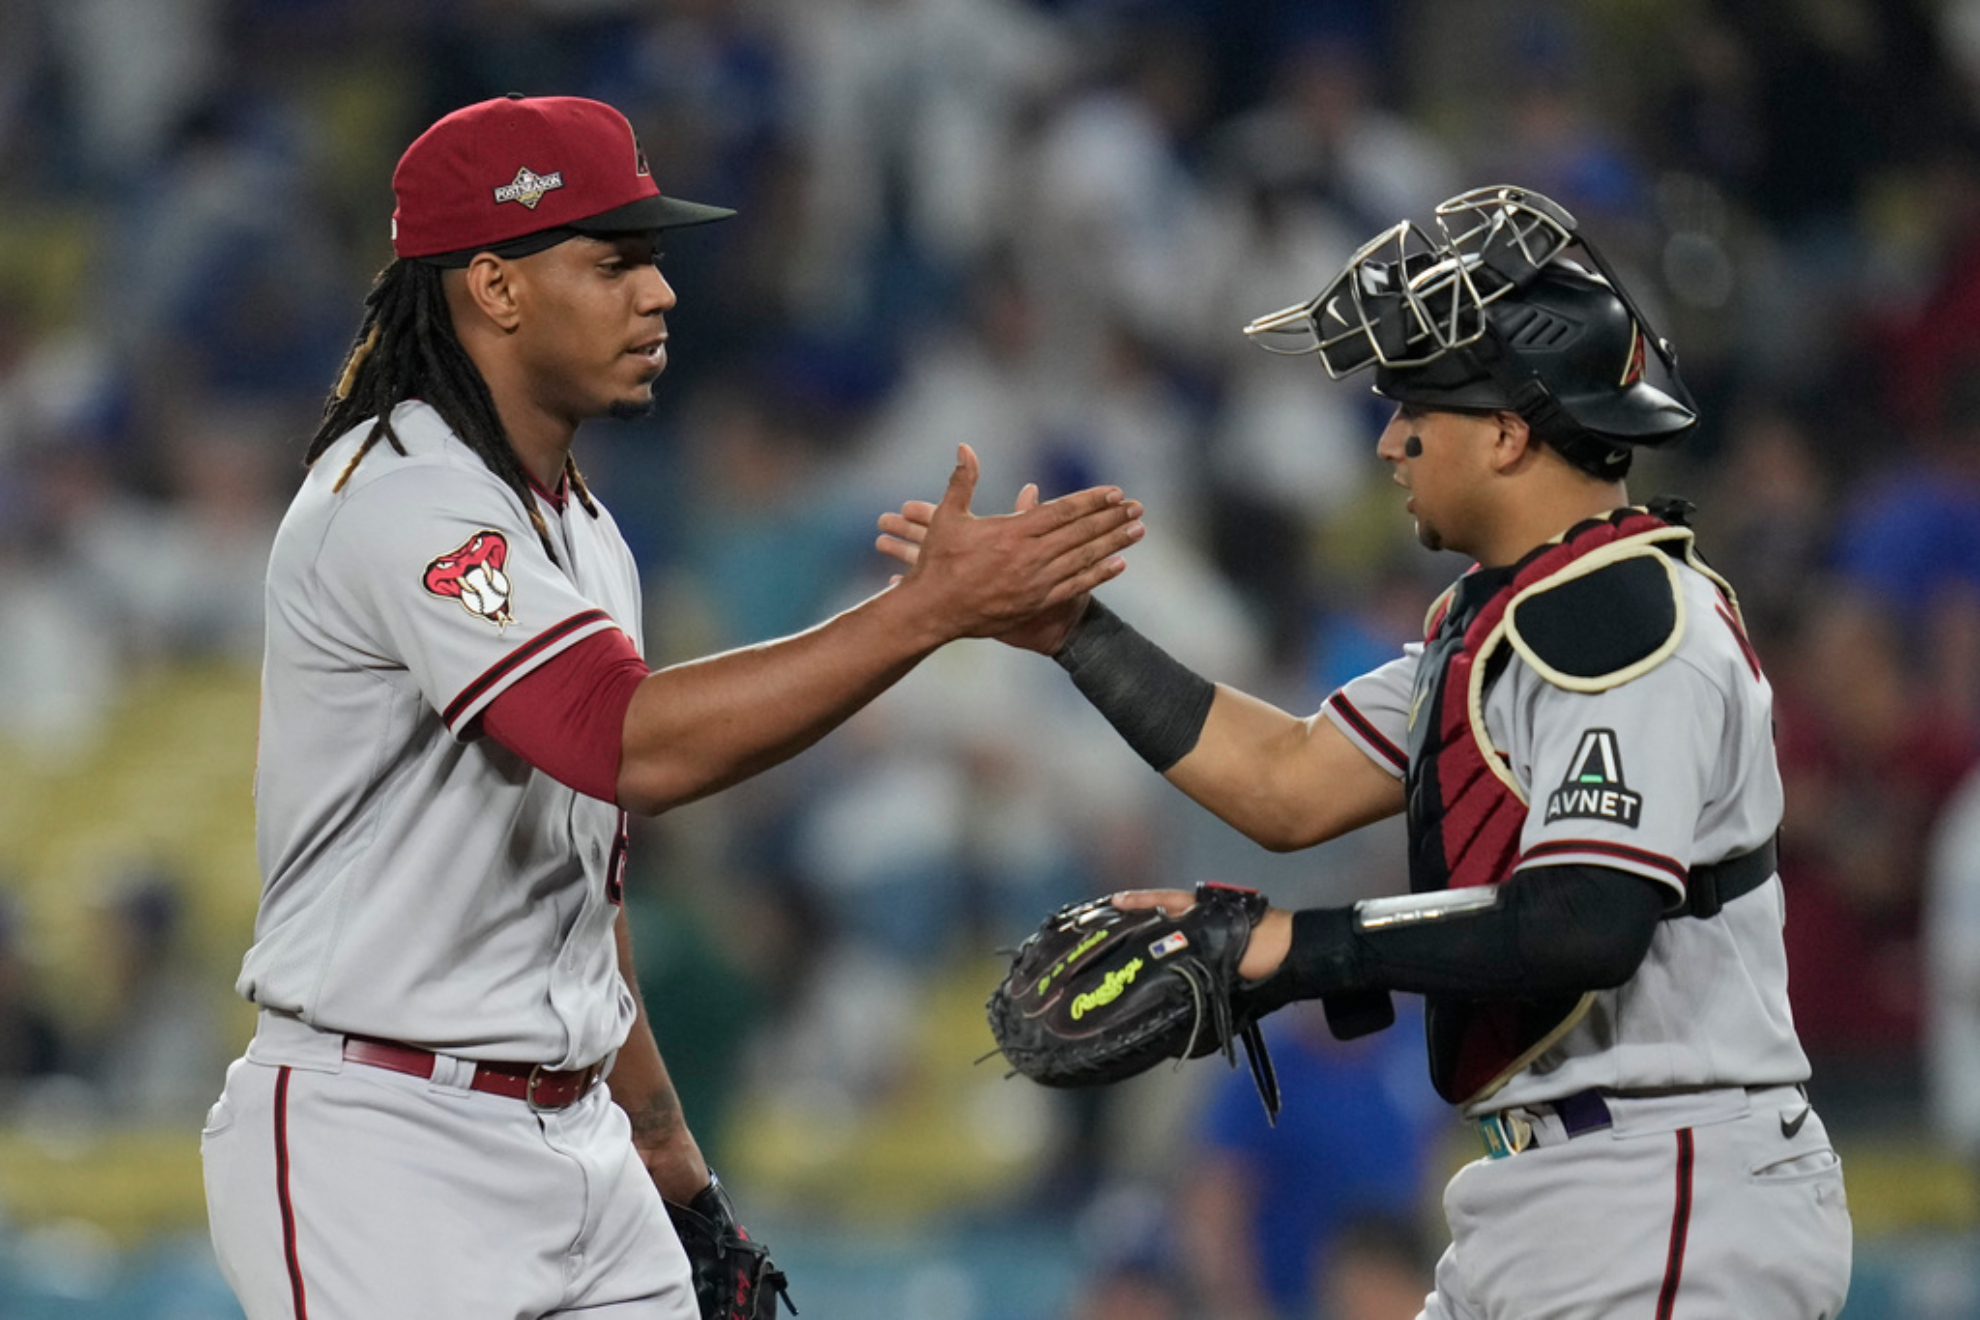 MLB Playoffs: Diamondbacks' poisonous bite paralyzes Kershaw and the Dodgers in Game 1 of NL Divisional Series